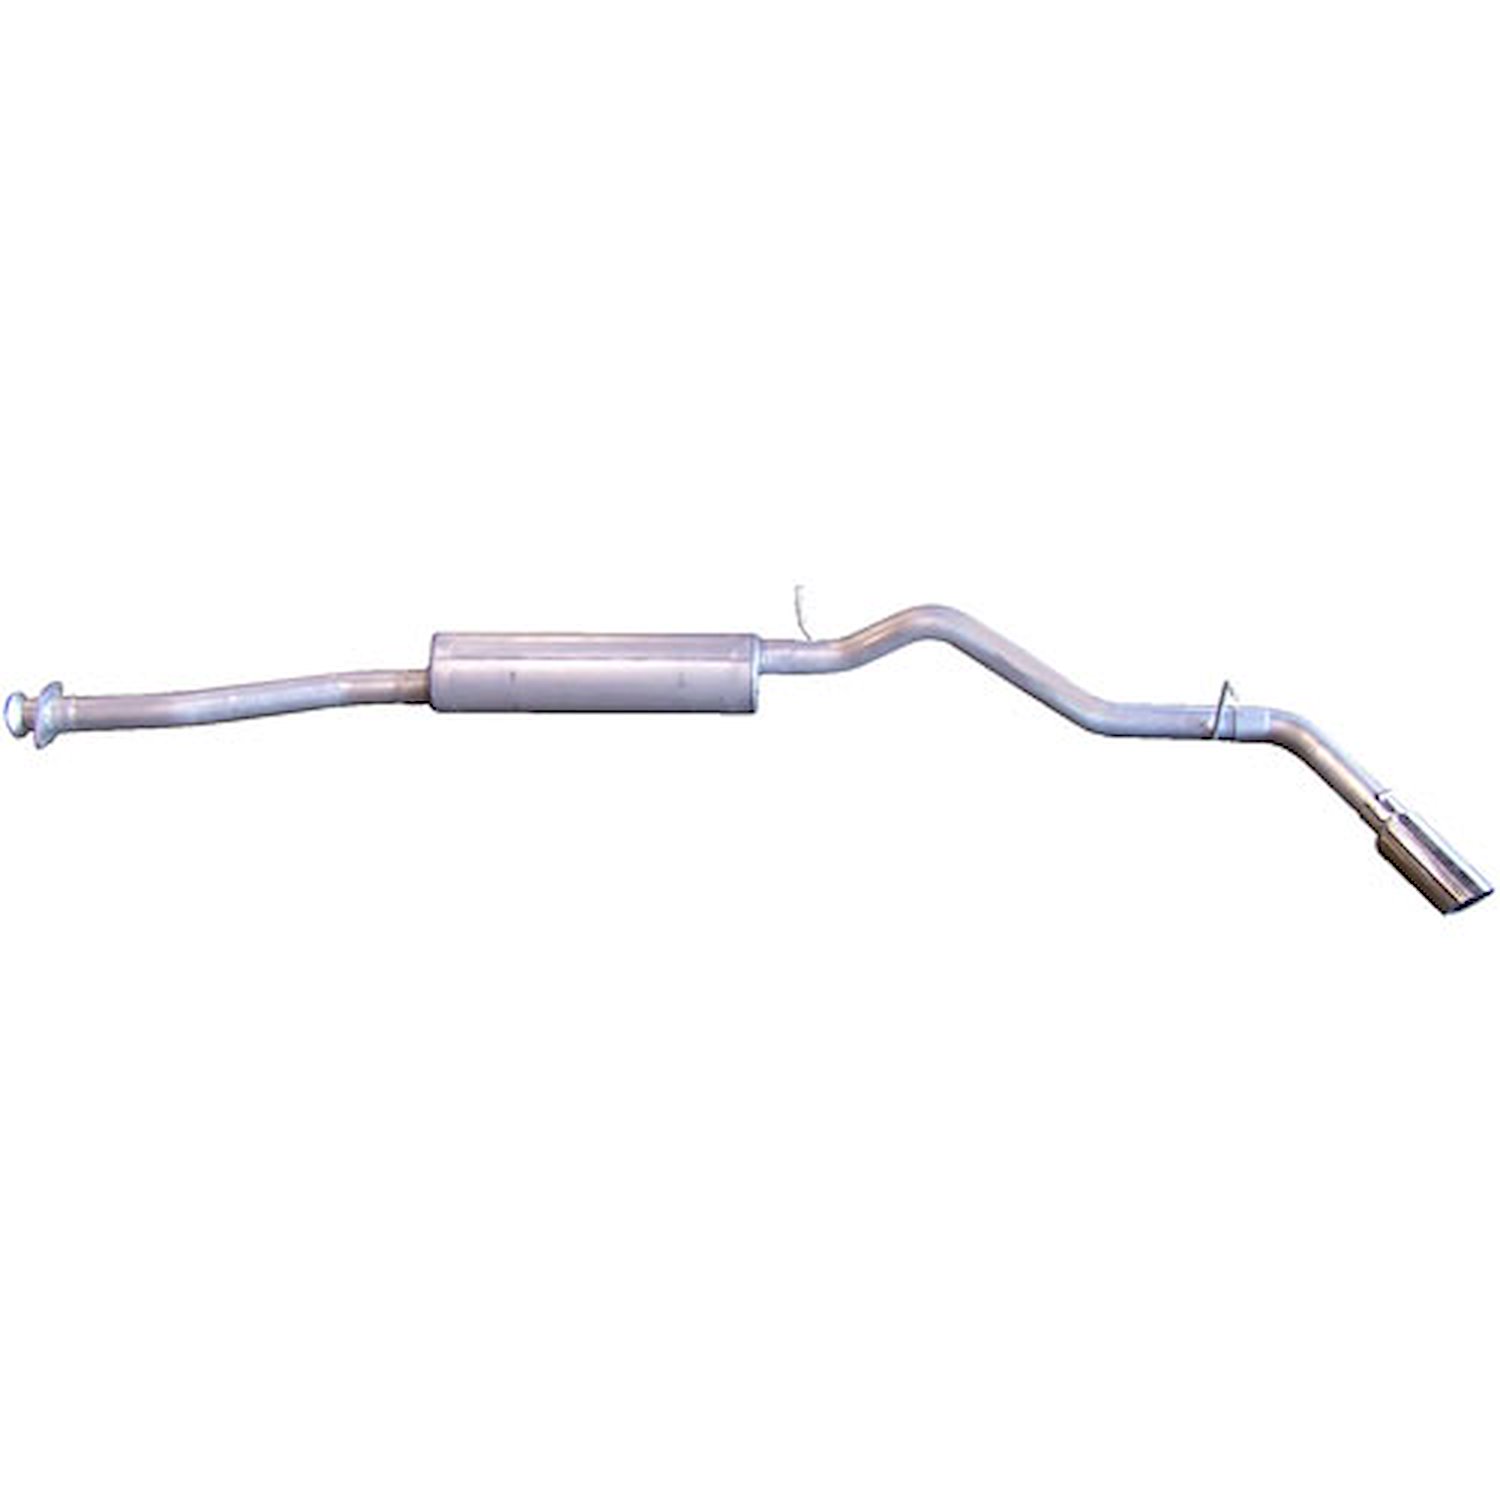 Swept-Side Cat-Back Exhaust 2004-12 Chevy Colorado/GMC Canyon 2.8L-3.7L